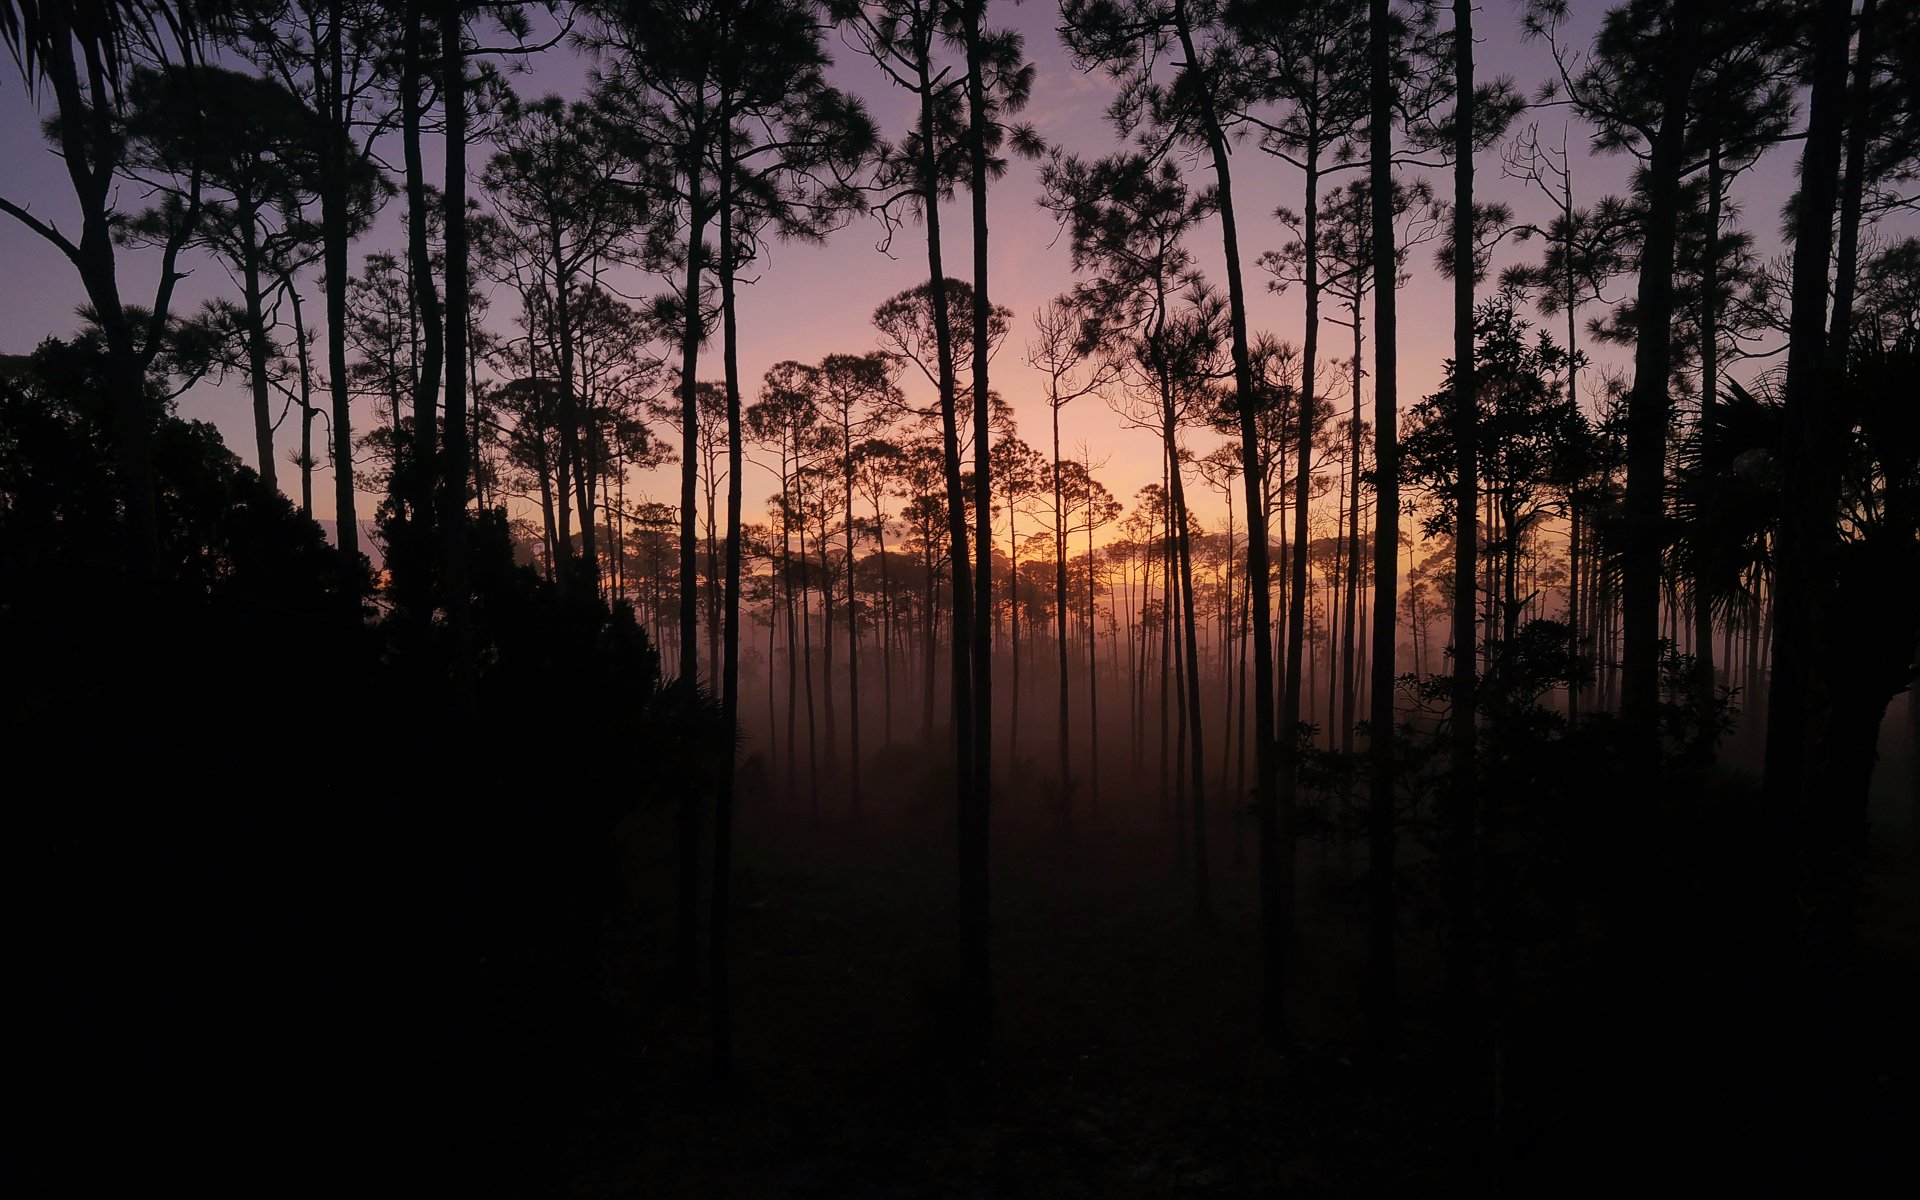 Sunrise through the pines in Simmons Bayou